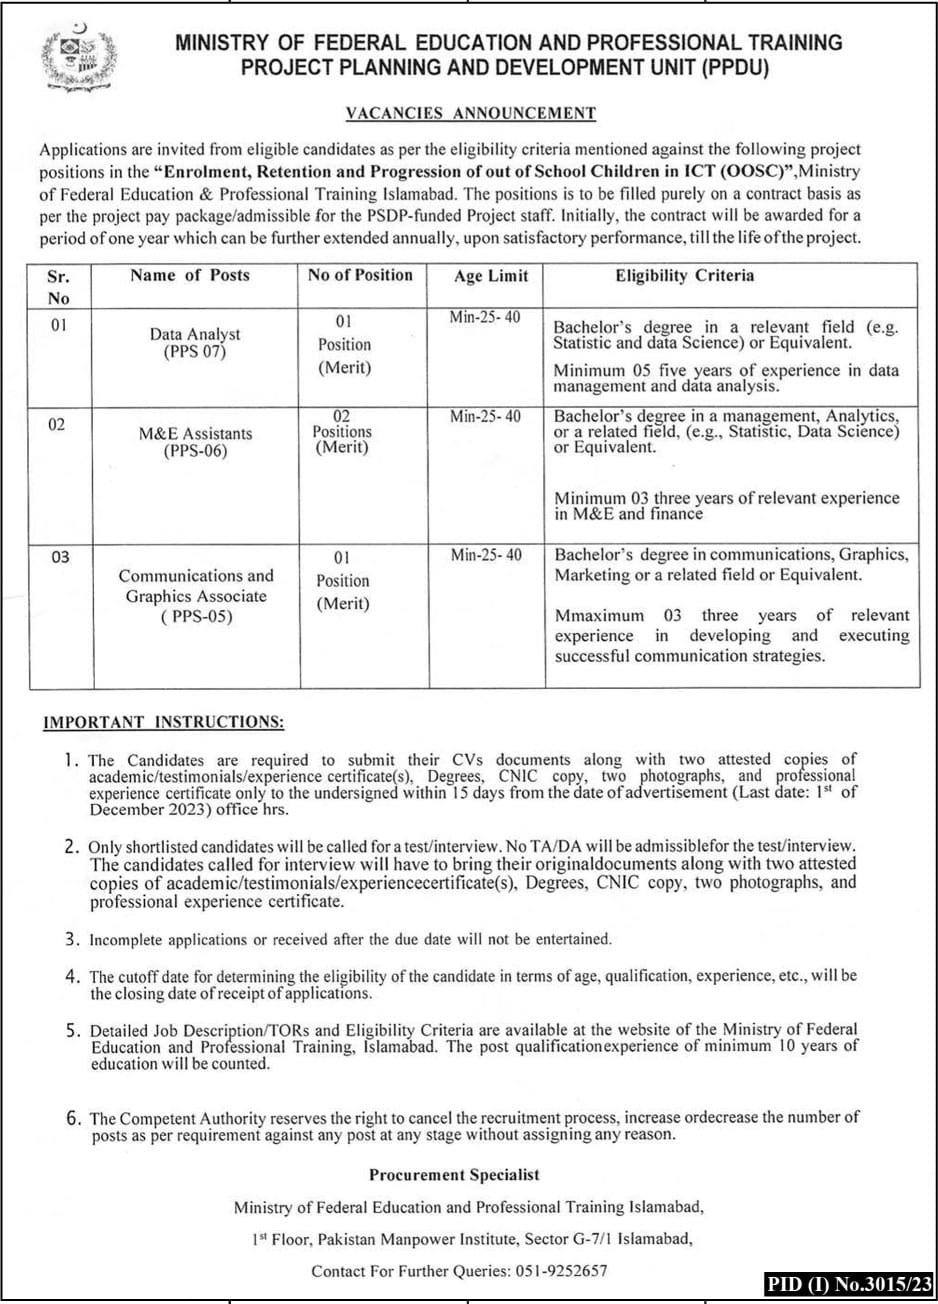 Ministry of Federal Education And Profissional Traning Jobs